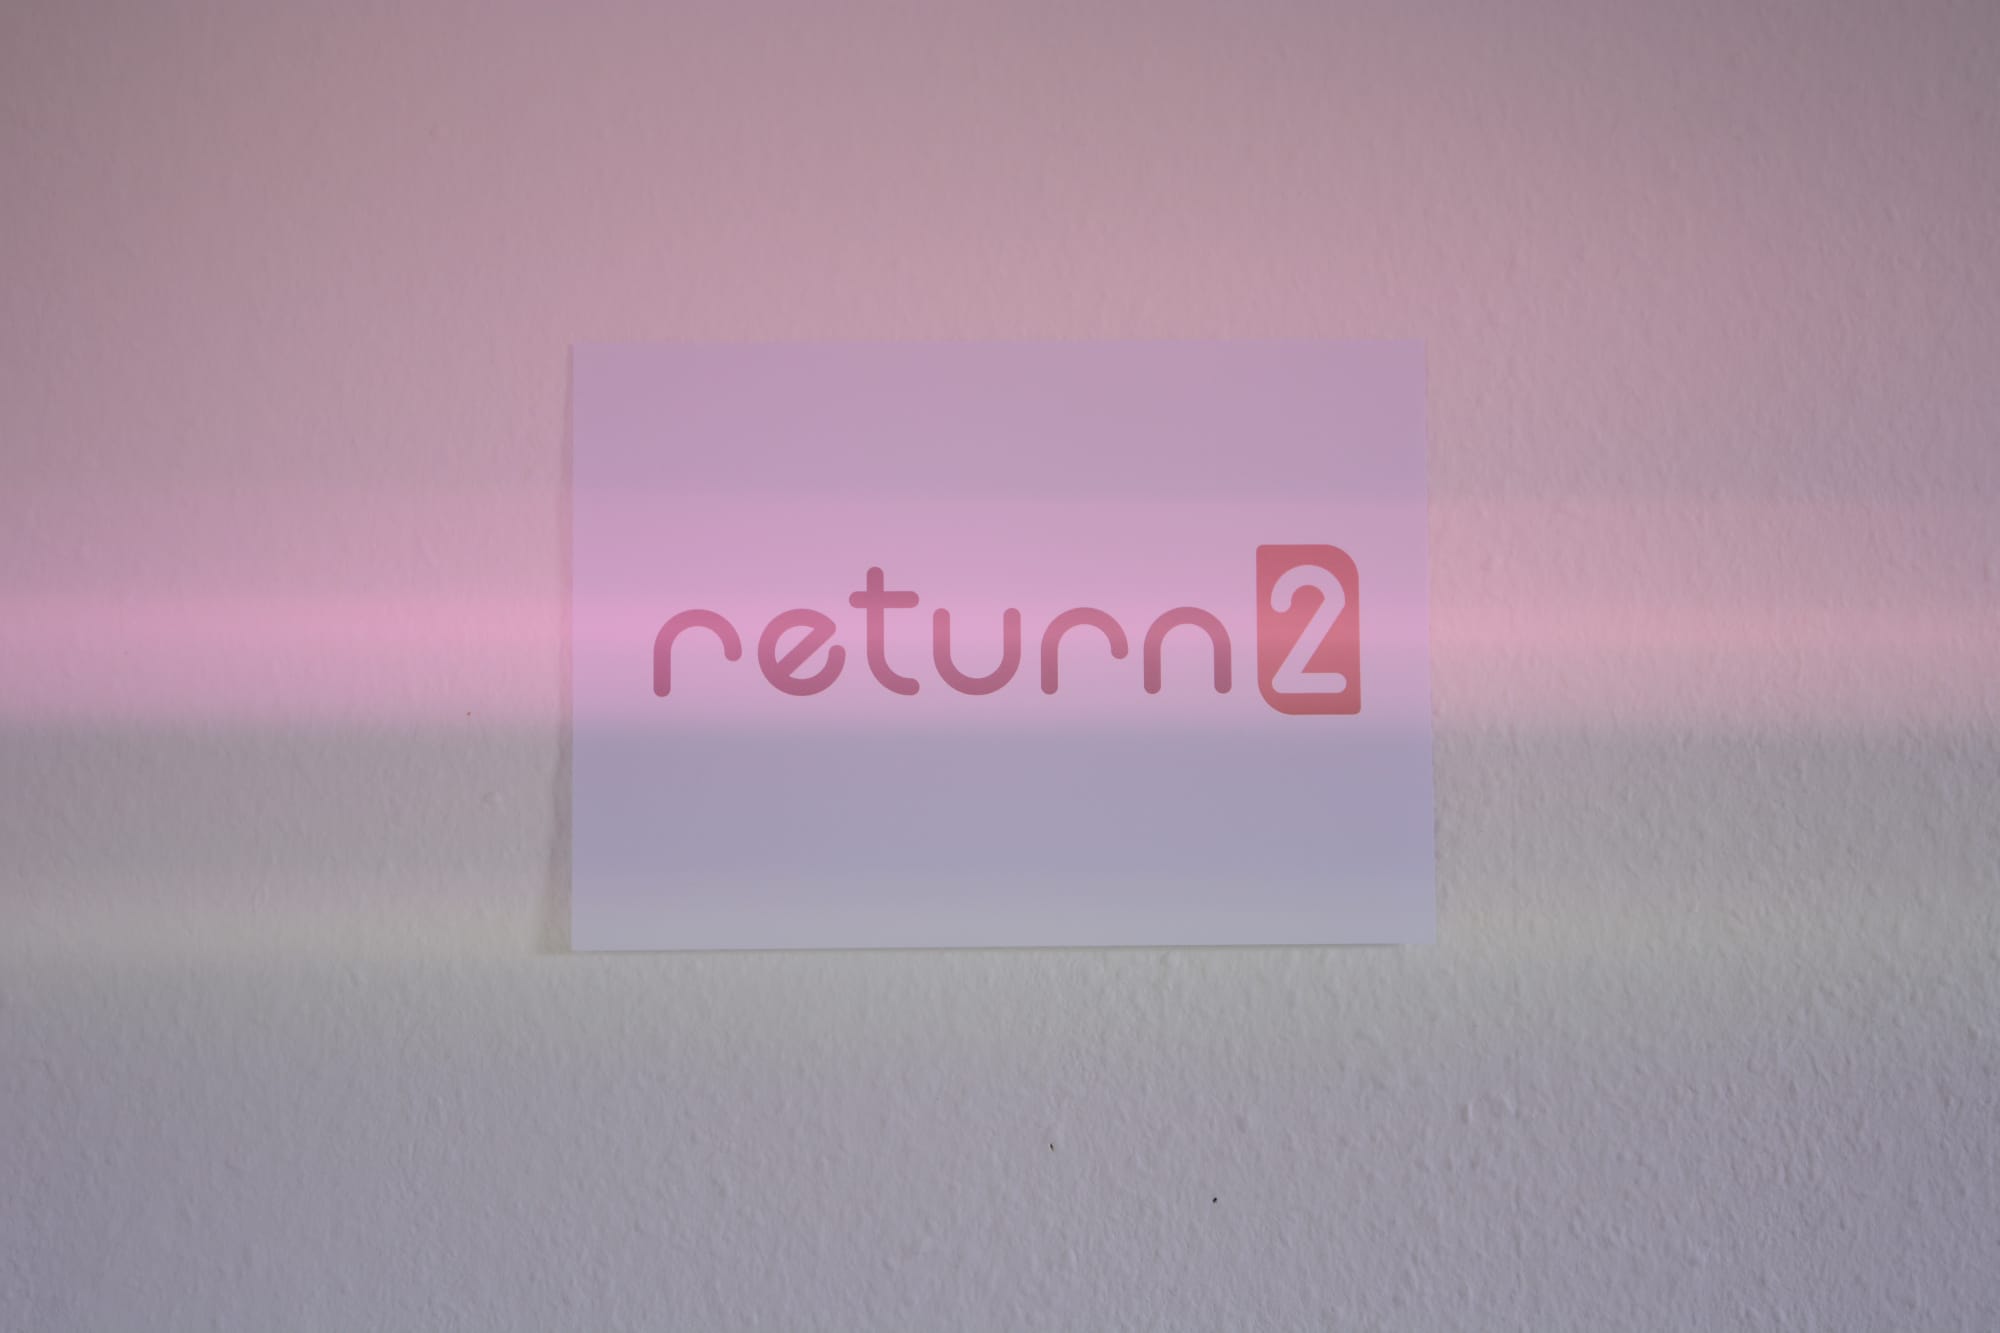 A picture of the return2 logo with a pink horizontal line